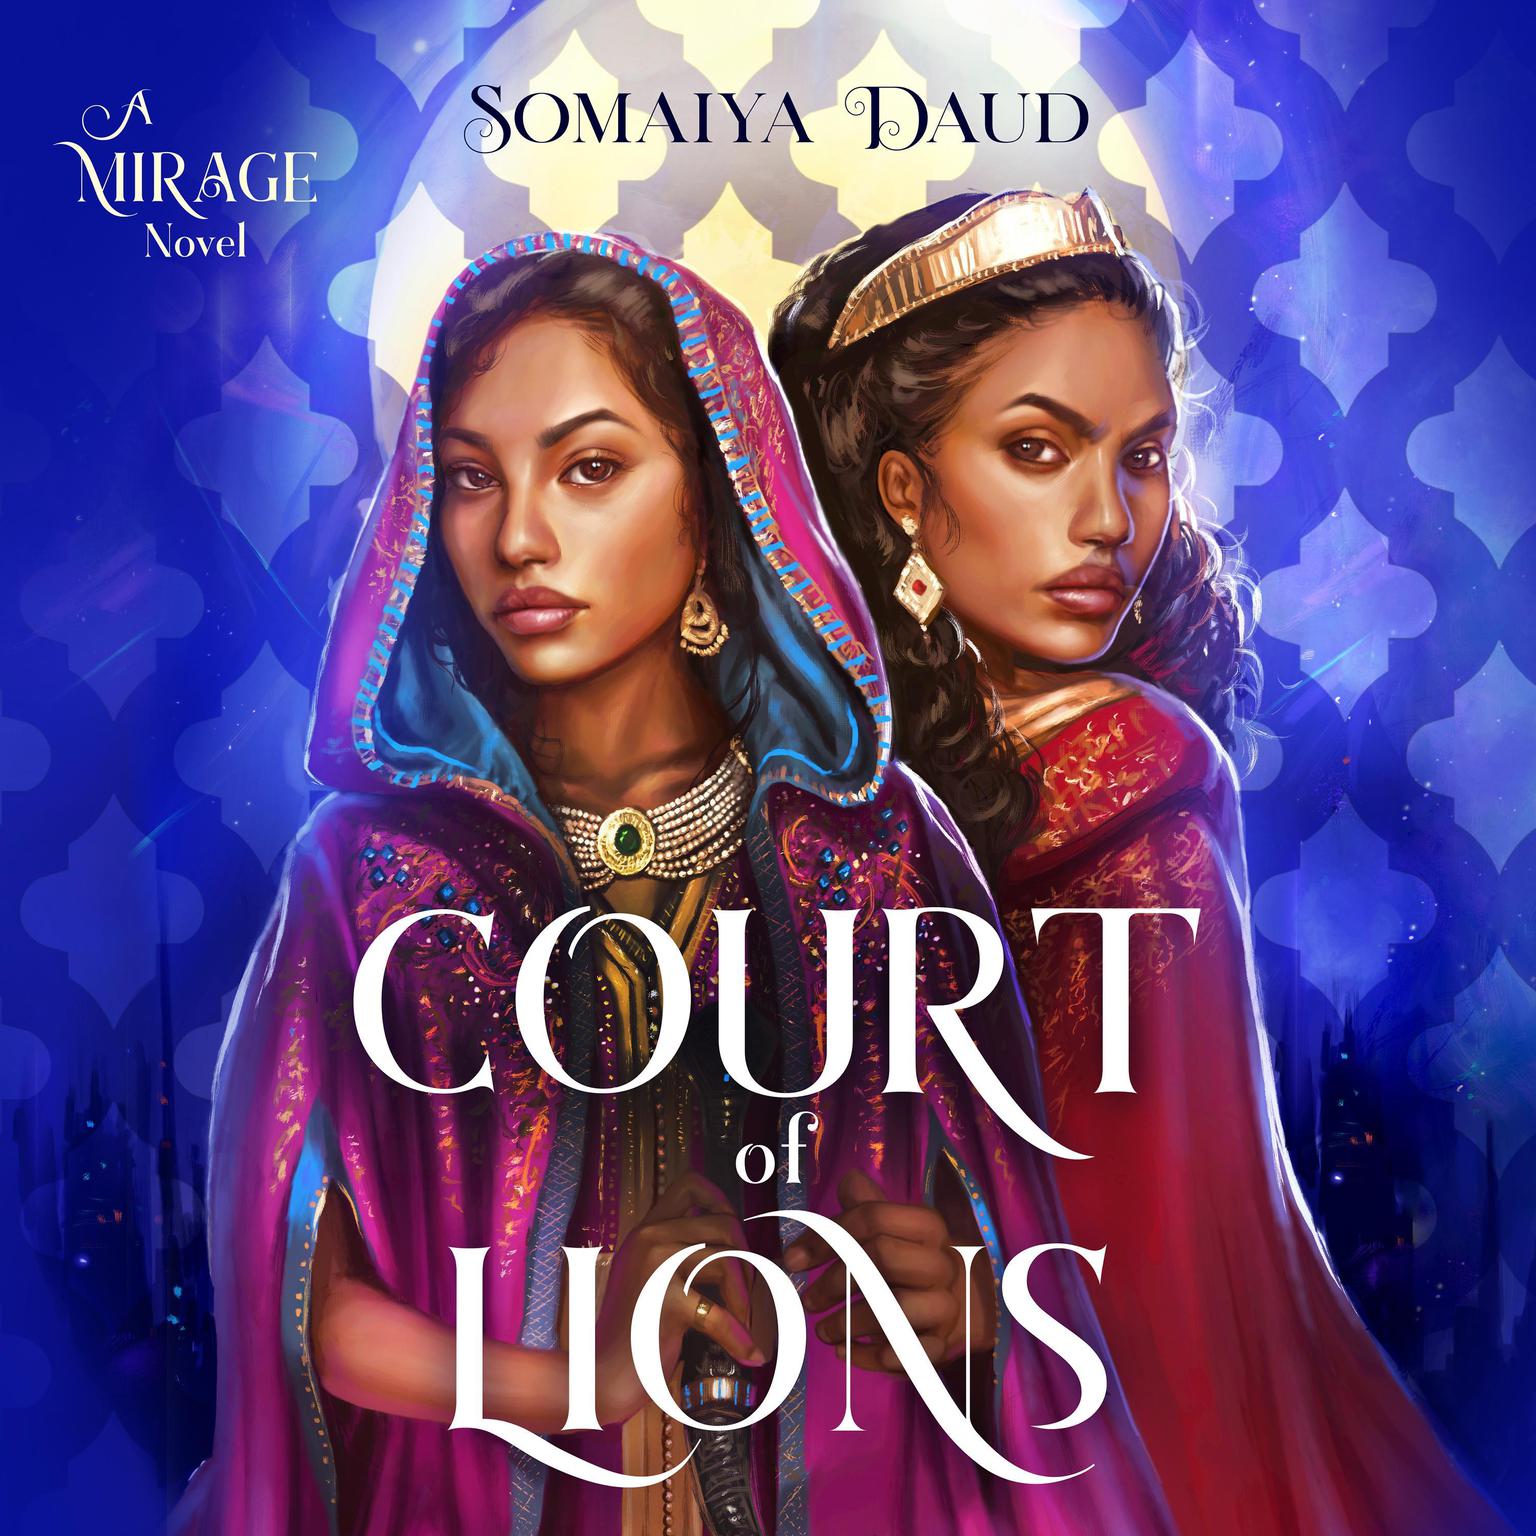 Court of Lions: A Mirage Novel Audiobook, by Somaiya Daud